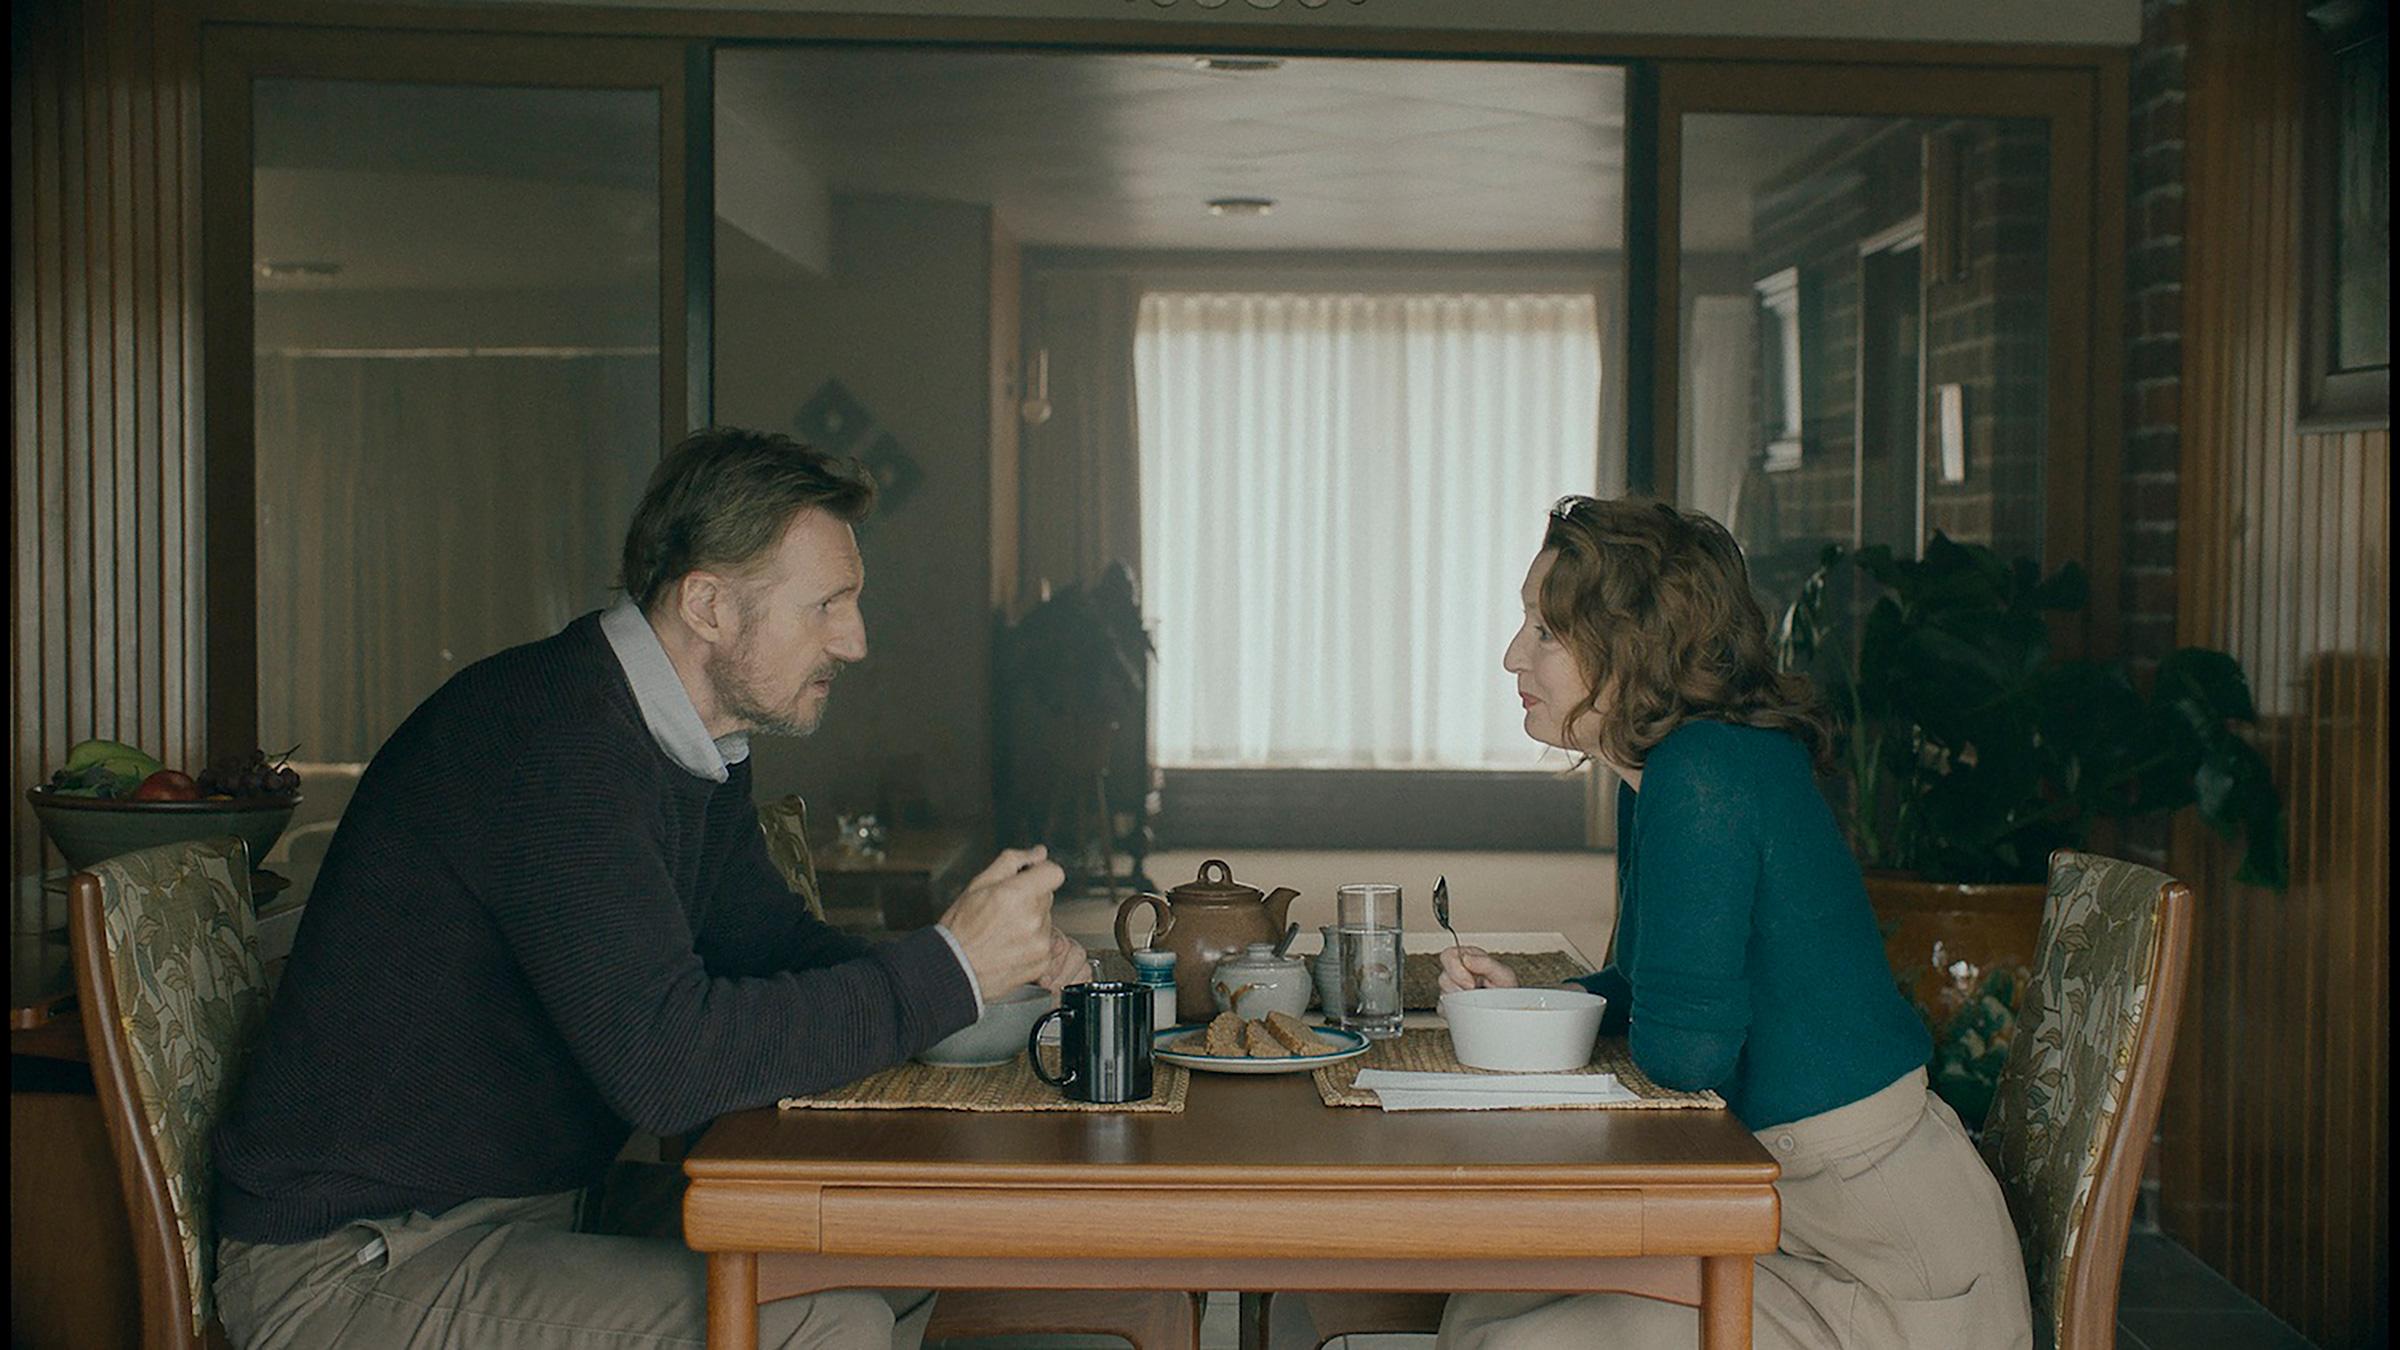 Picture is a production still from the film showing the couple sitting across from each other at their breakfast table. 